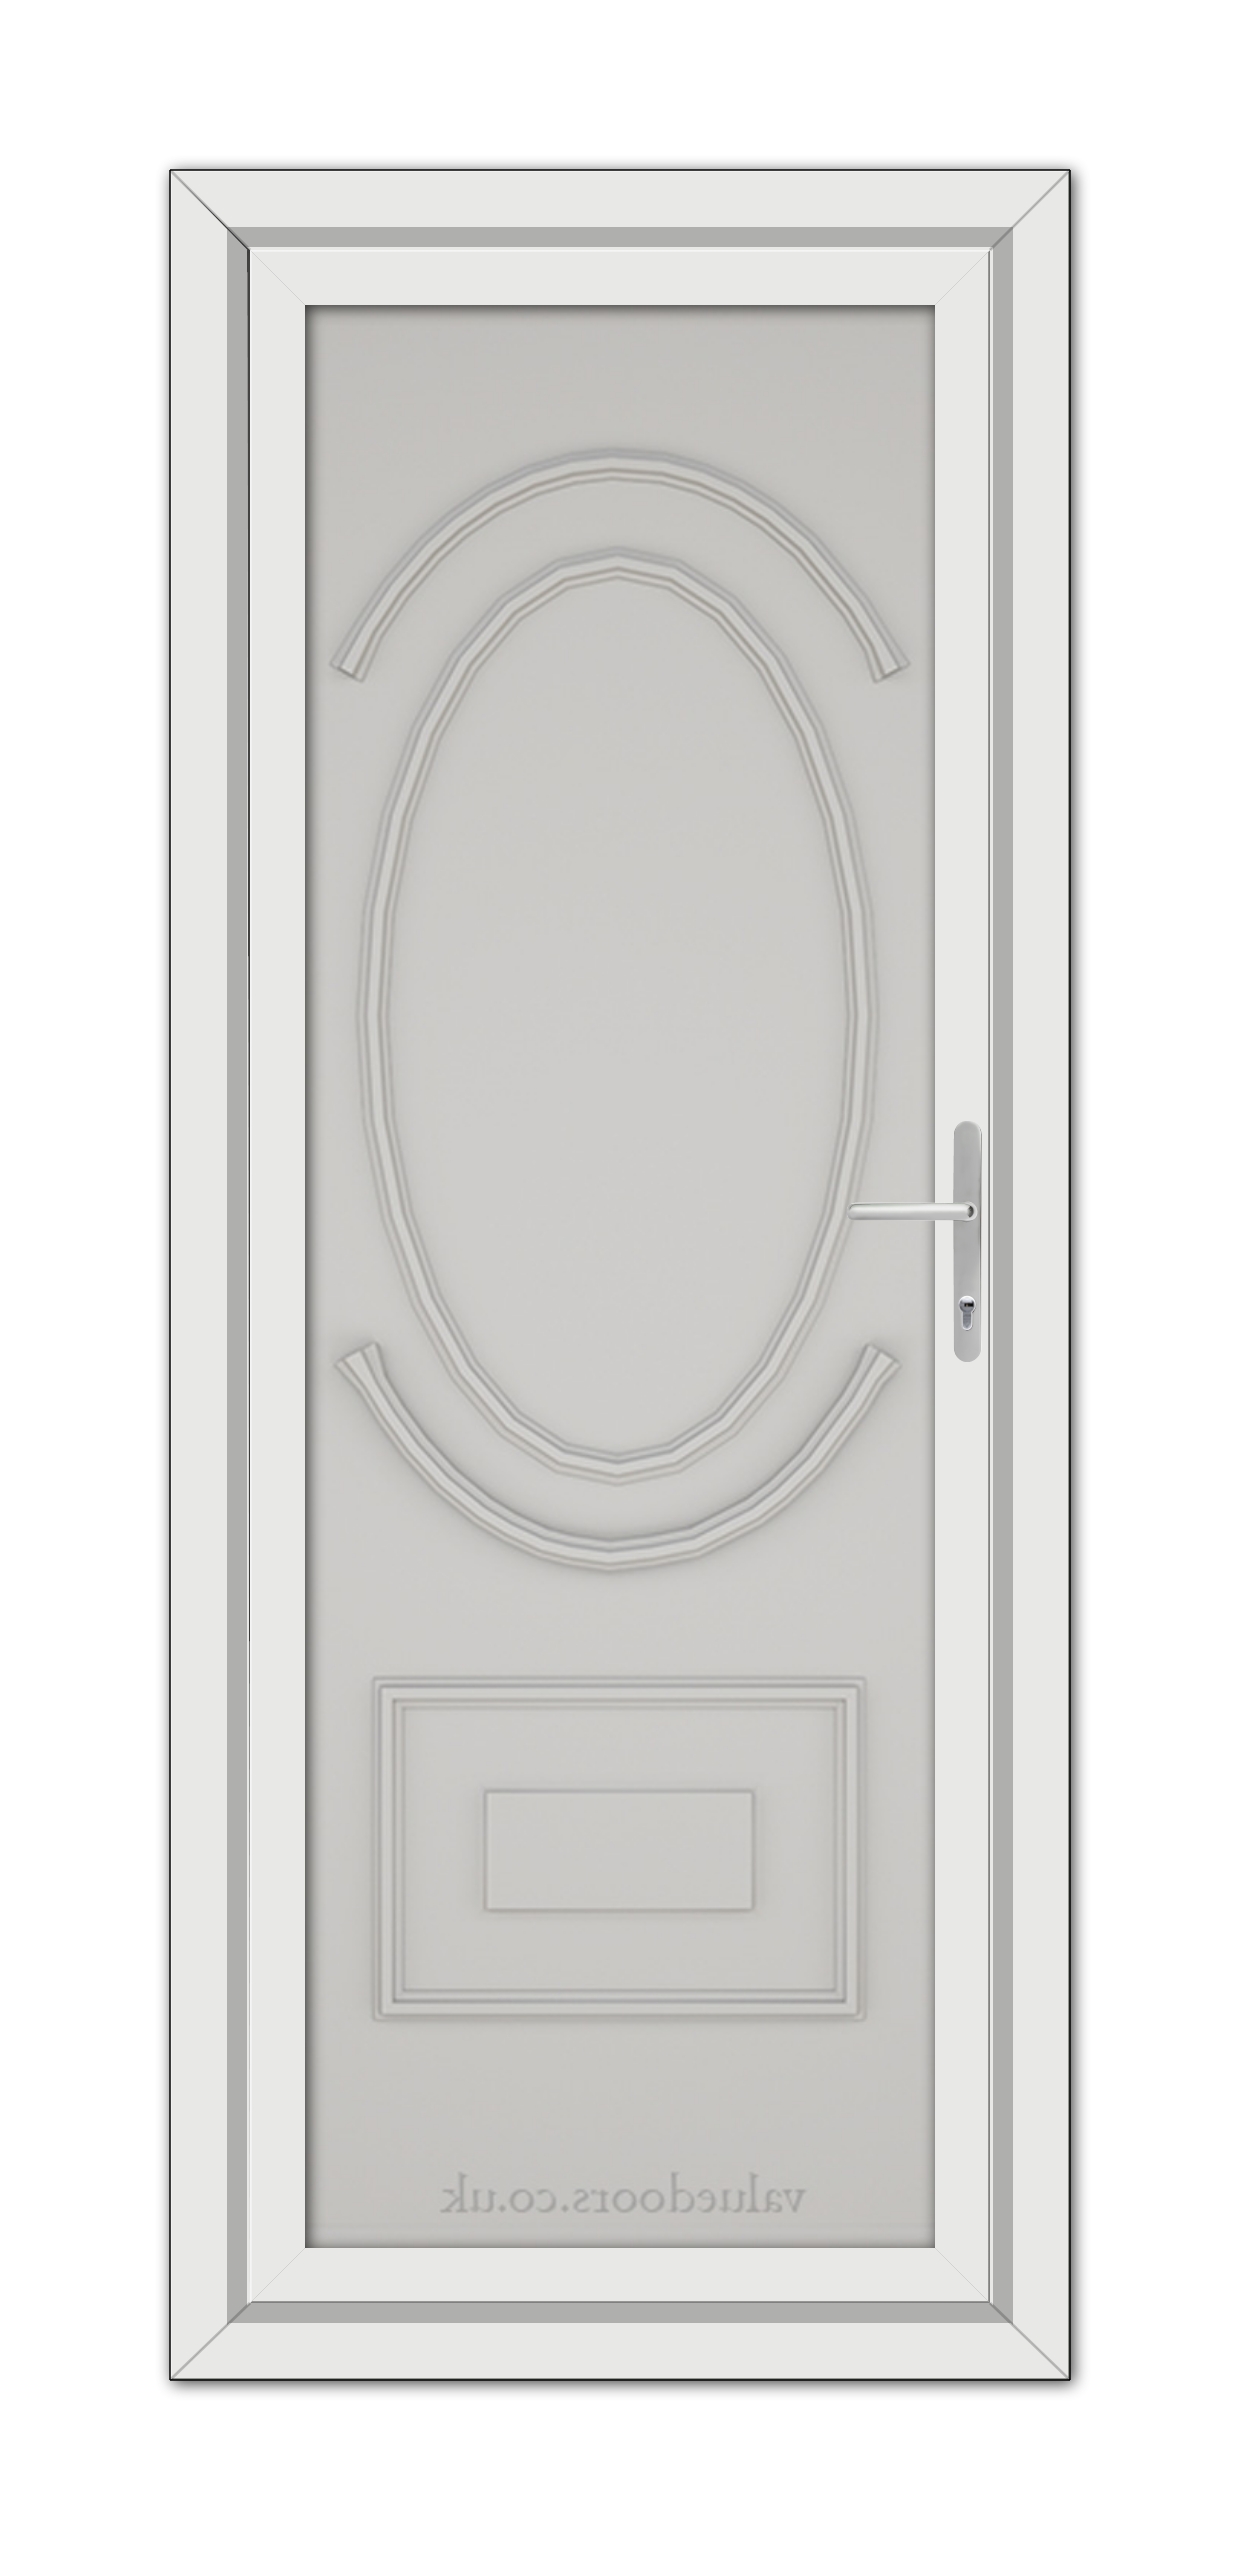 Silver Grey Richmond Solid uPVC Door with an oval glass panel at the top and a rectangular panel at the bottom, featuring a simple handle on the right side.